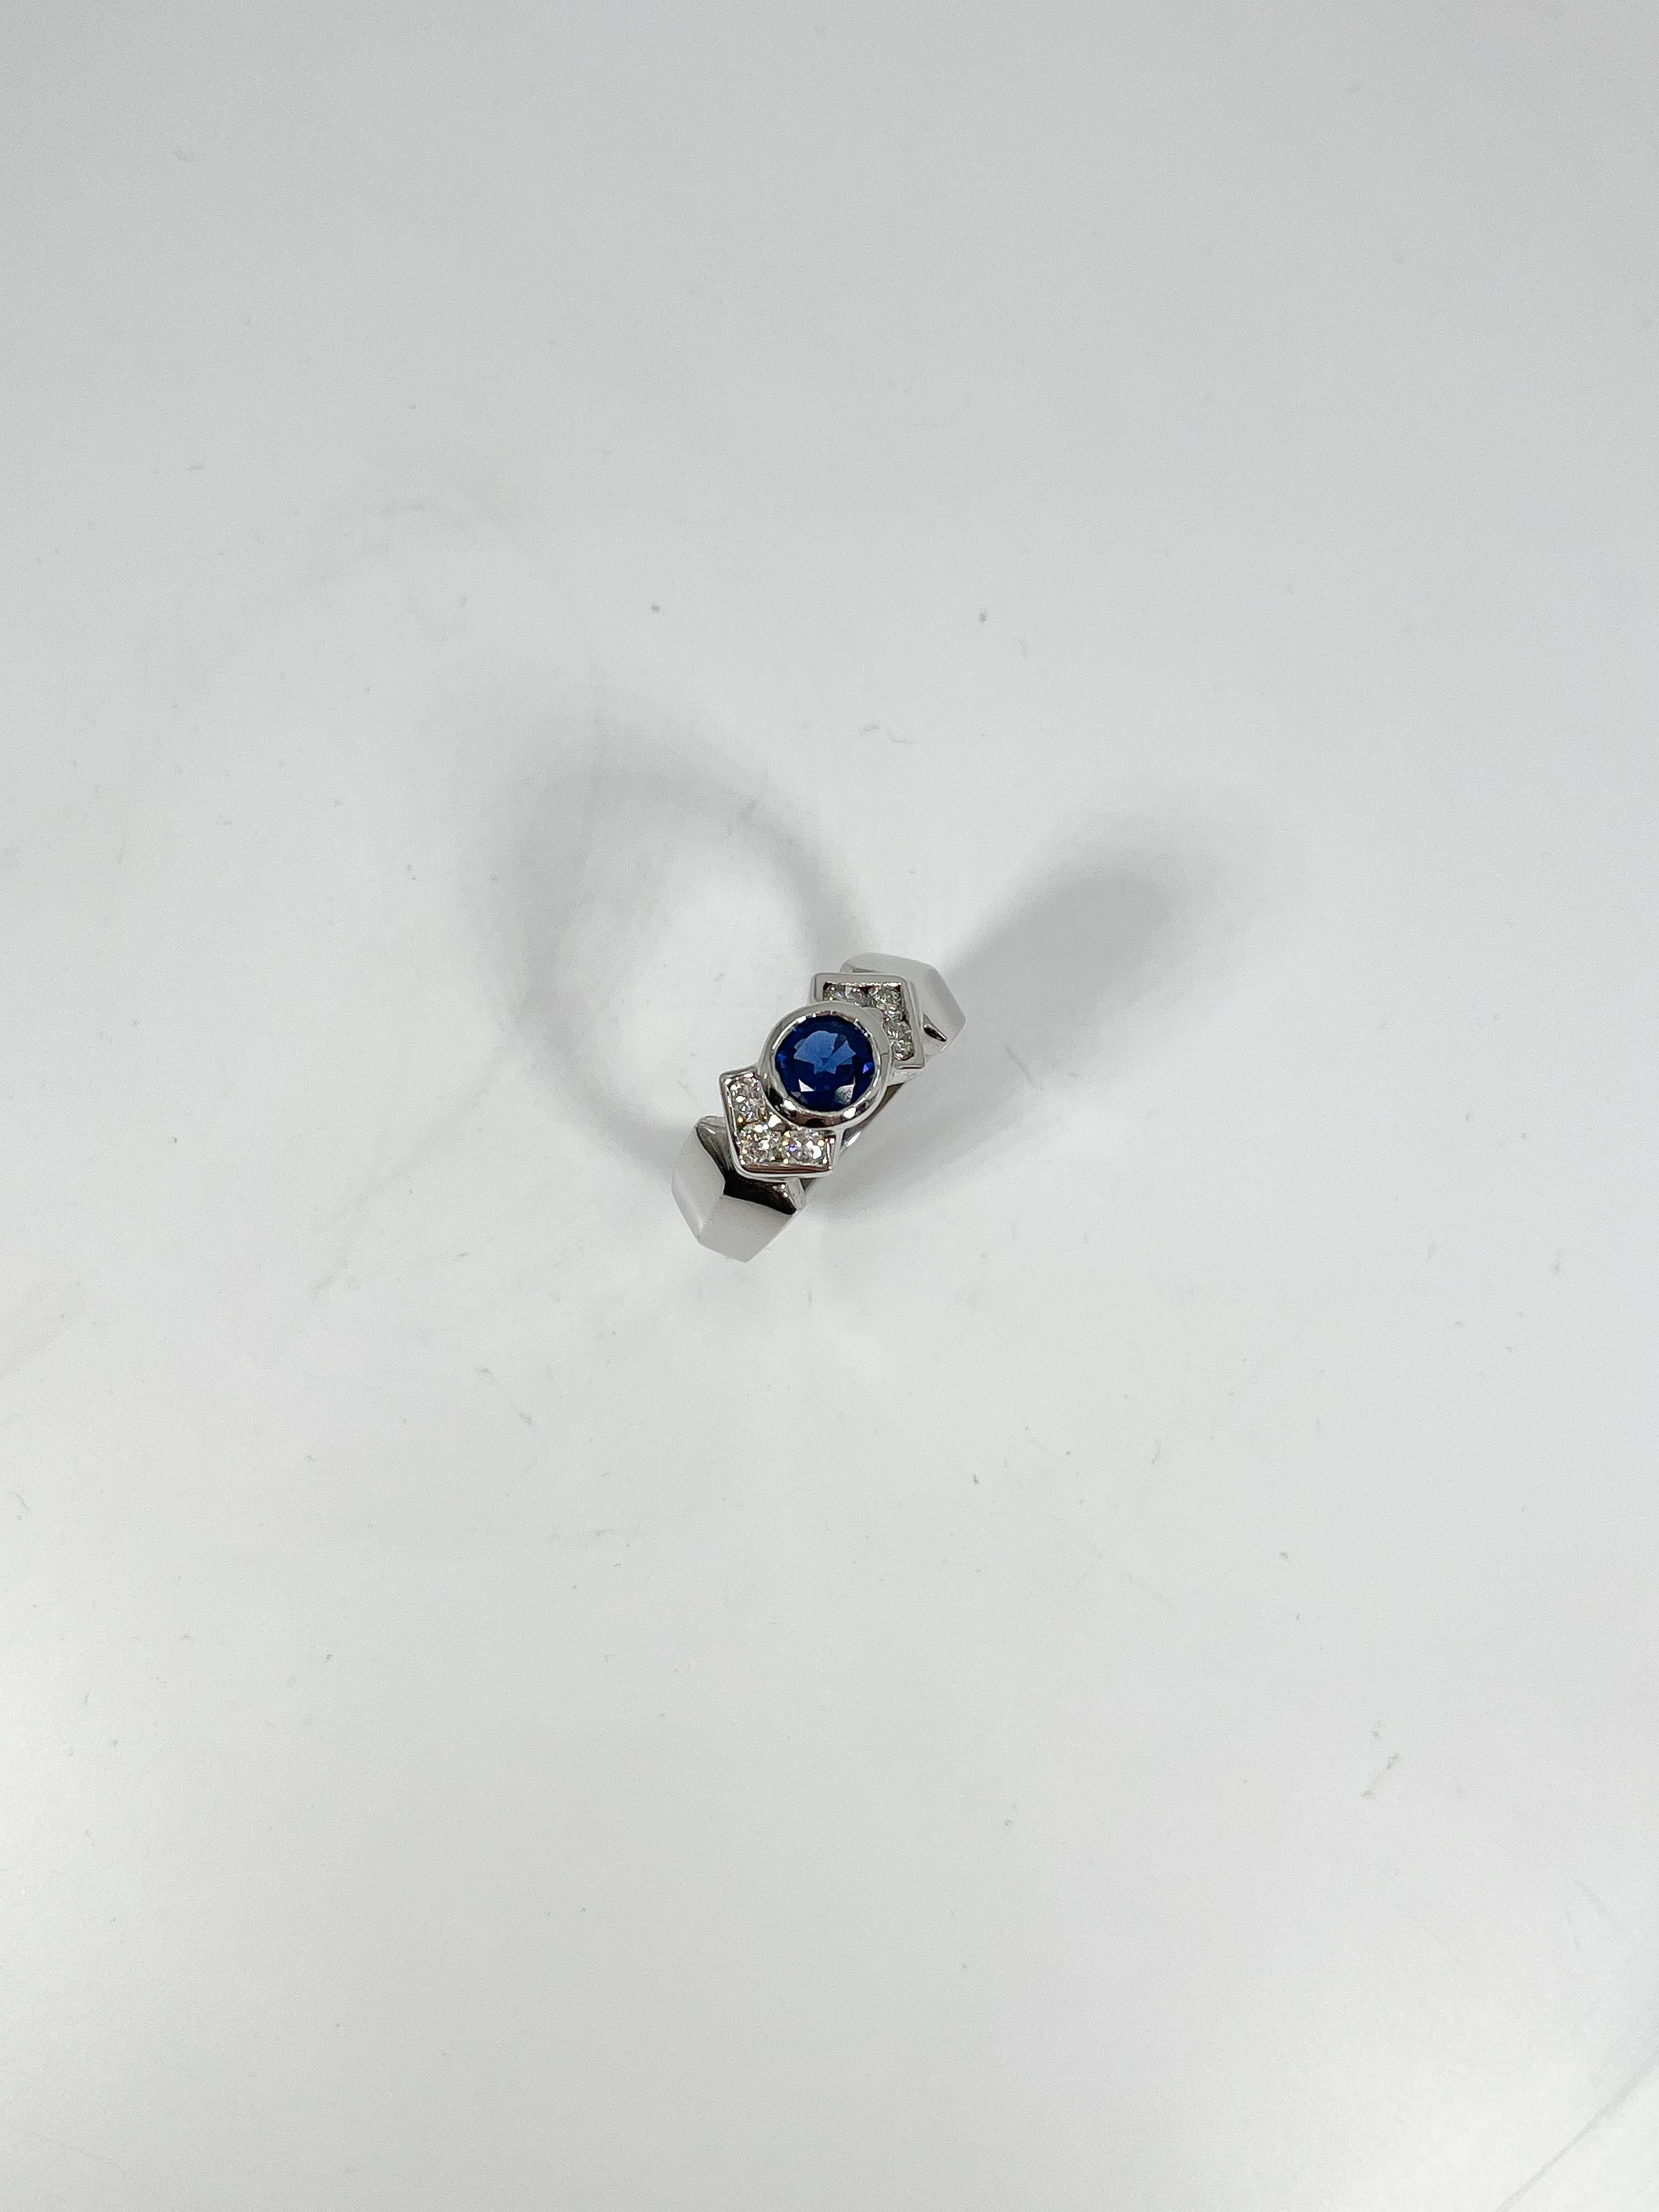 14k white gold round bezel .60 CT sapphire and .50 CTW diamond ring. the stones in this ring are all round, three diamonds on both sides of sapphire, the width is 7.8 mm. the stone diameter measures 7.1 mm, size 6 1/4, and it has a total weight of